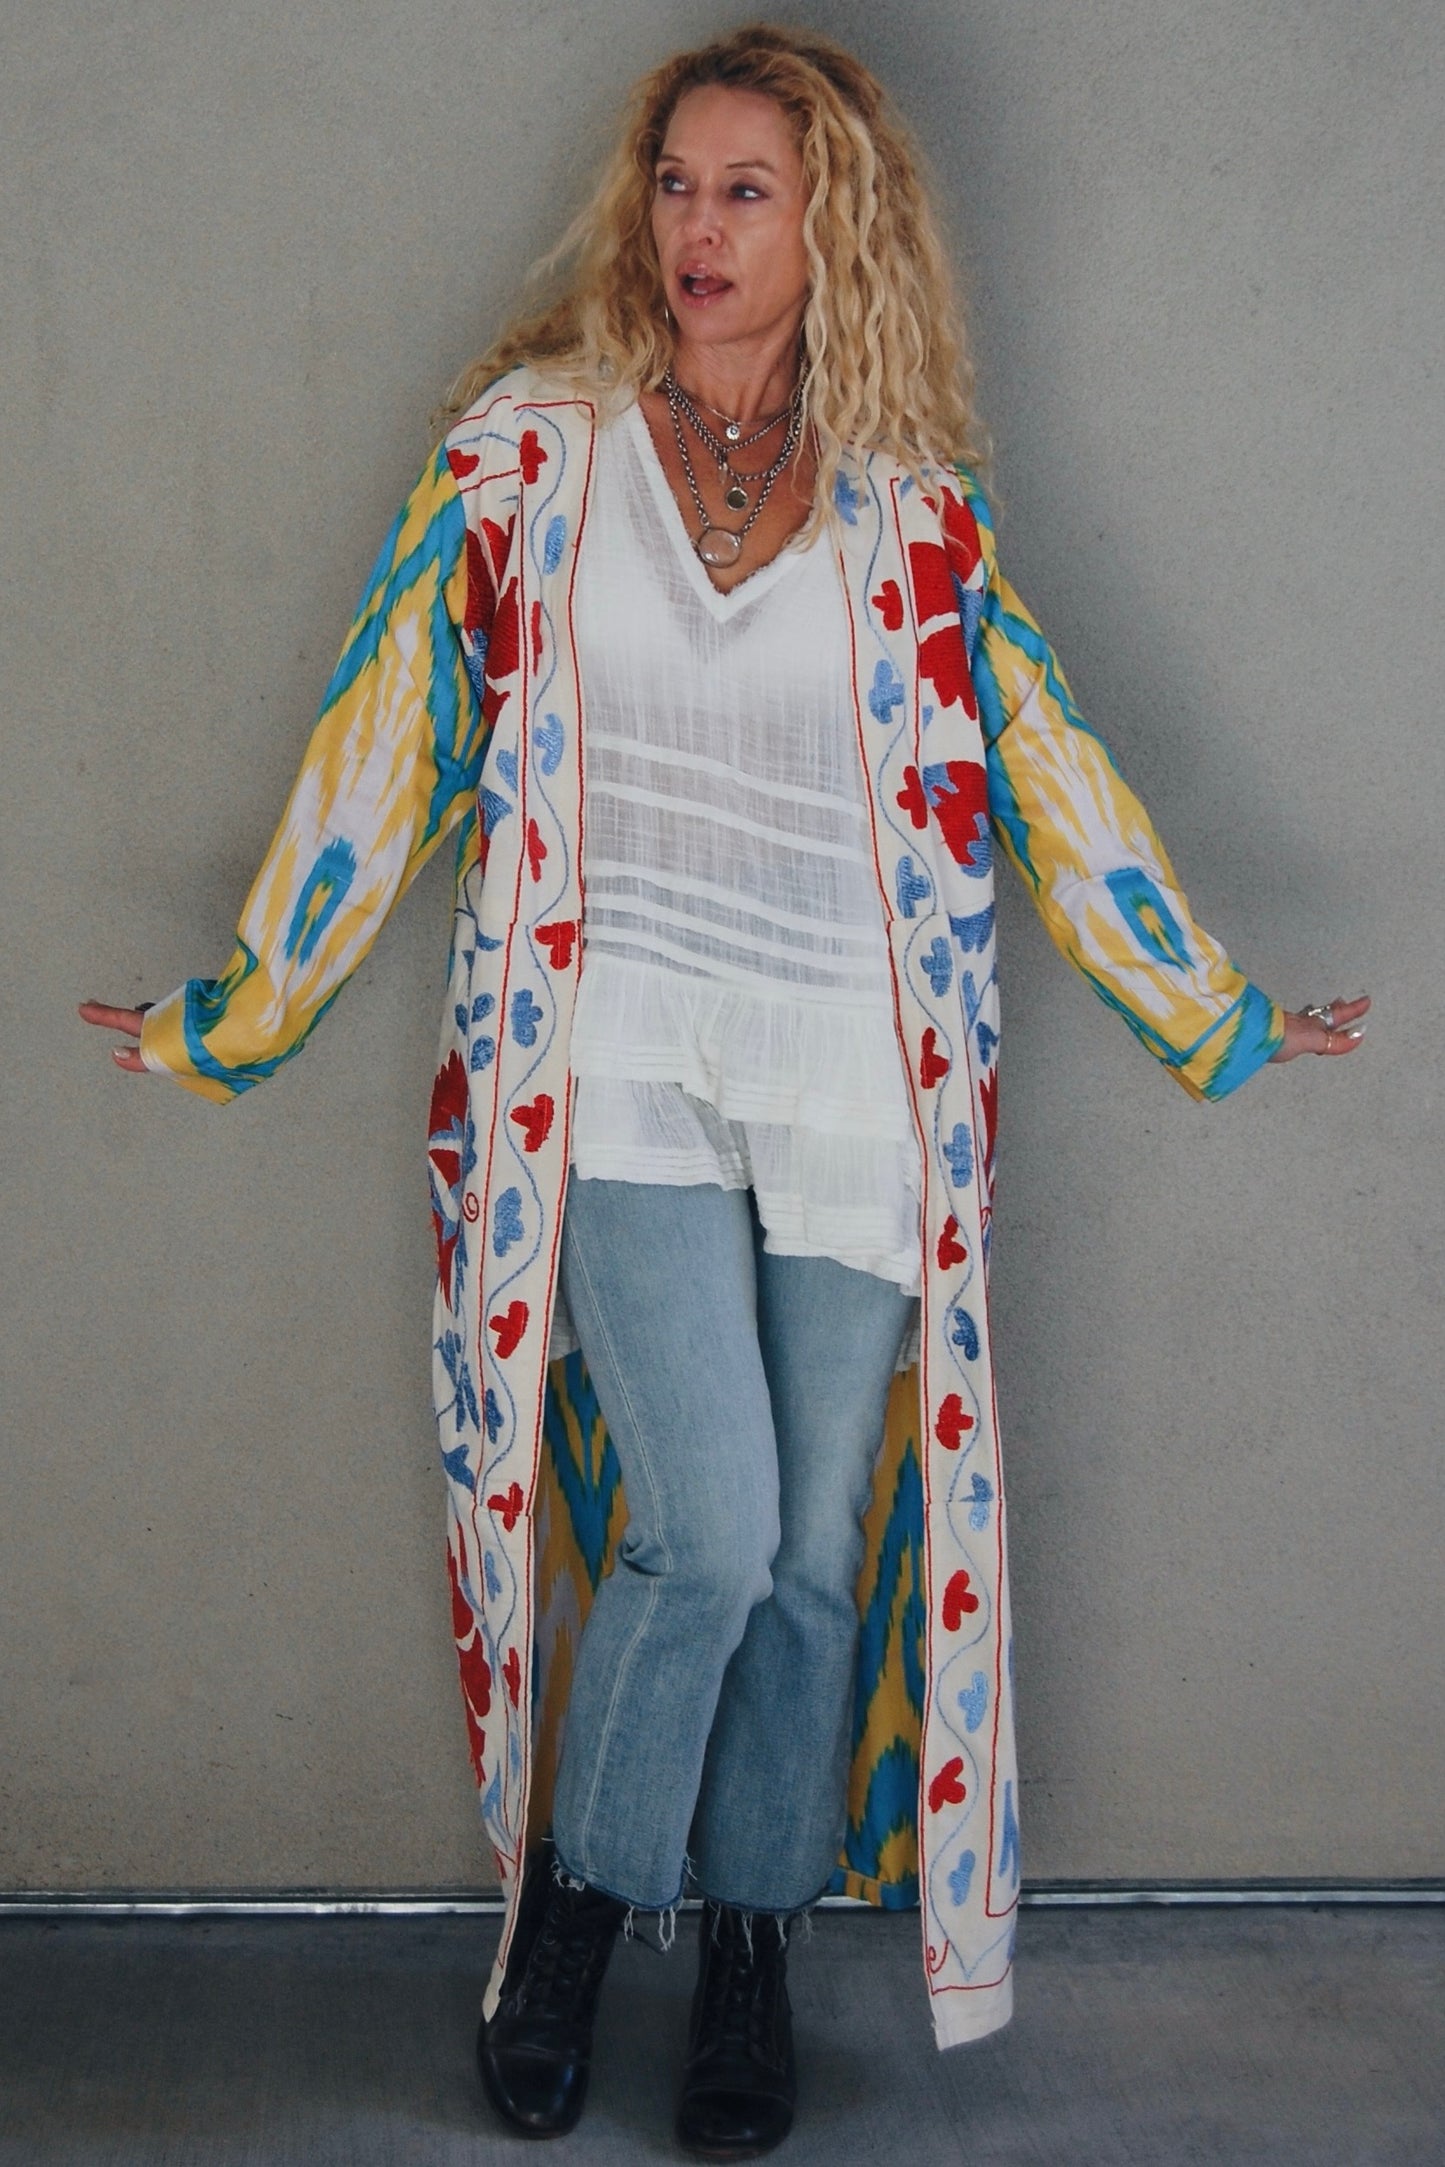 The Dreamer Jacket in Tropical Ikat - SpiritedBoutiques Boho Hippie Boutique Style Jacket, Spirited